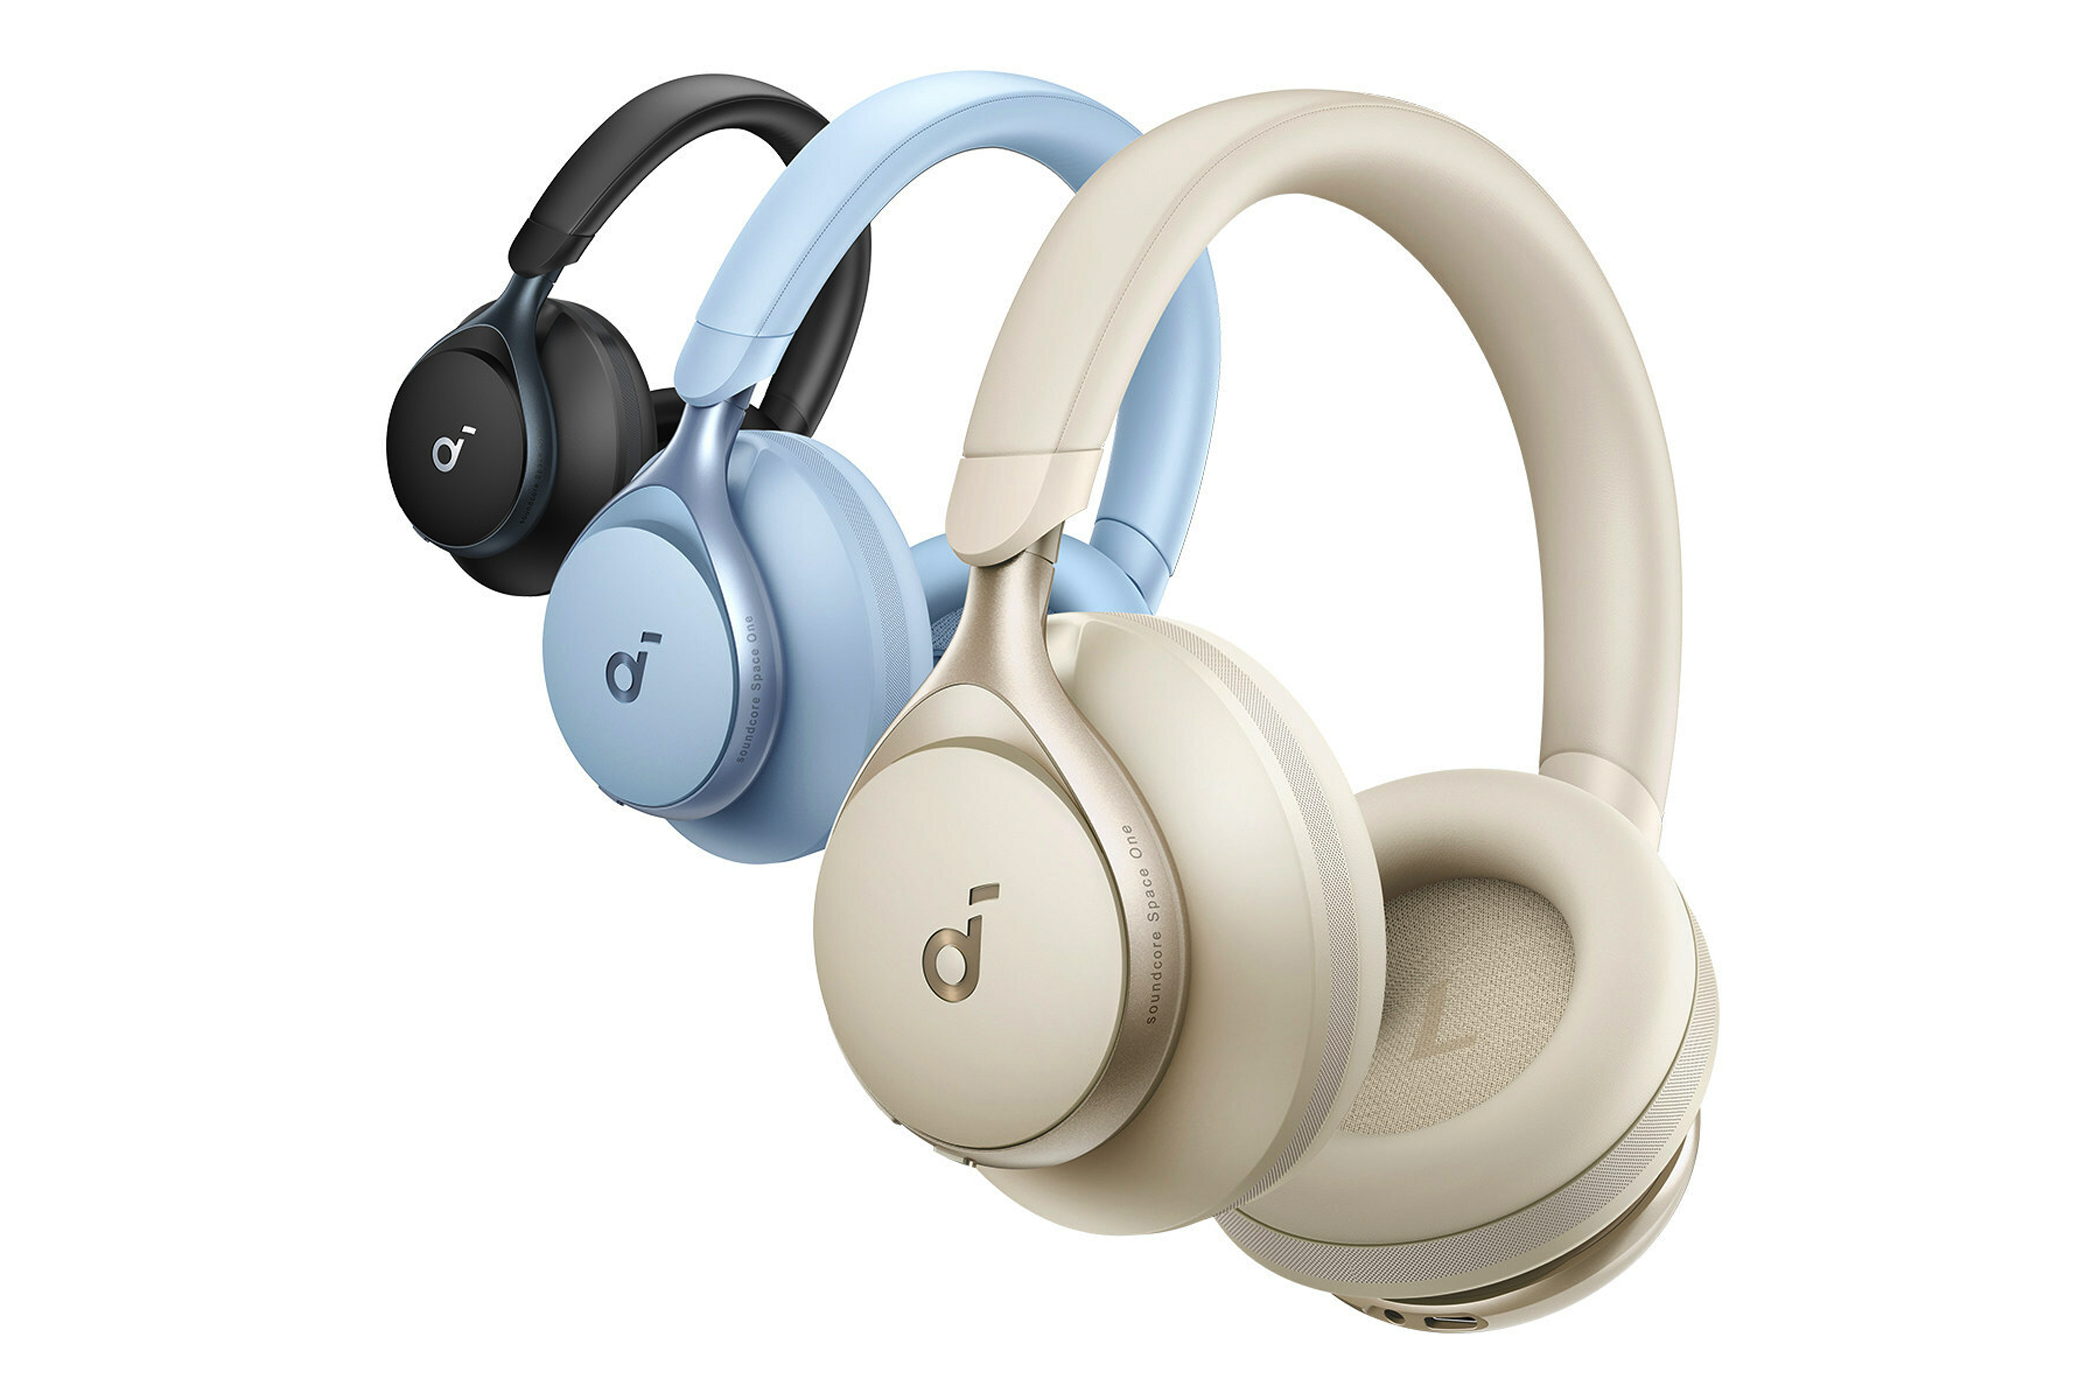 The Anker Soundcore Space One headphones in black, blue, and beige.